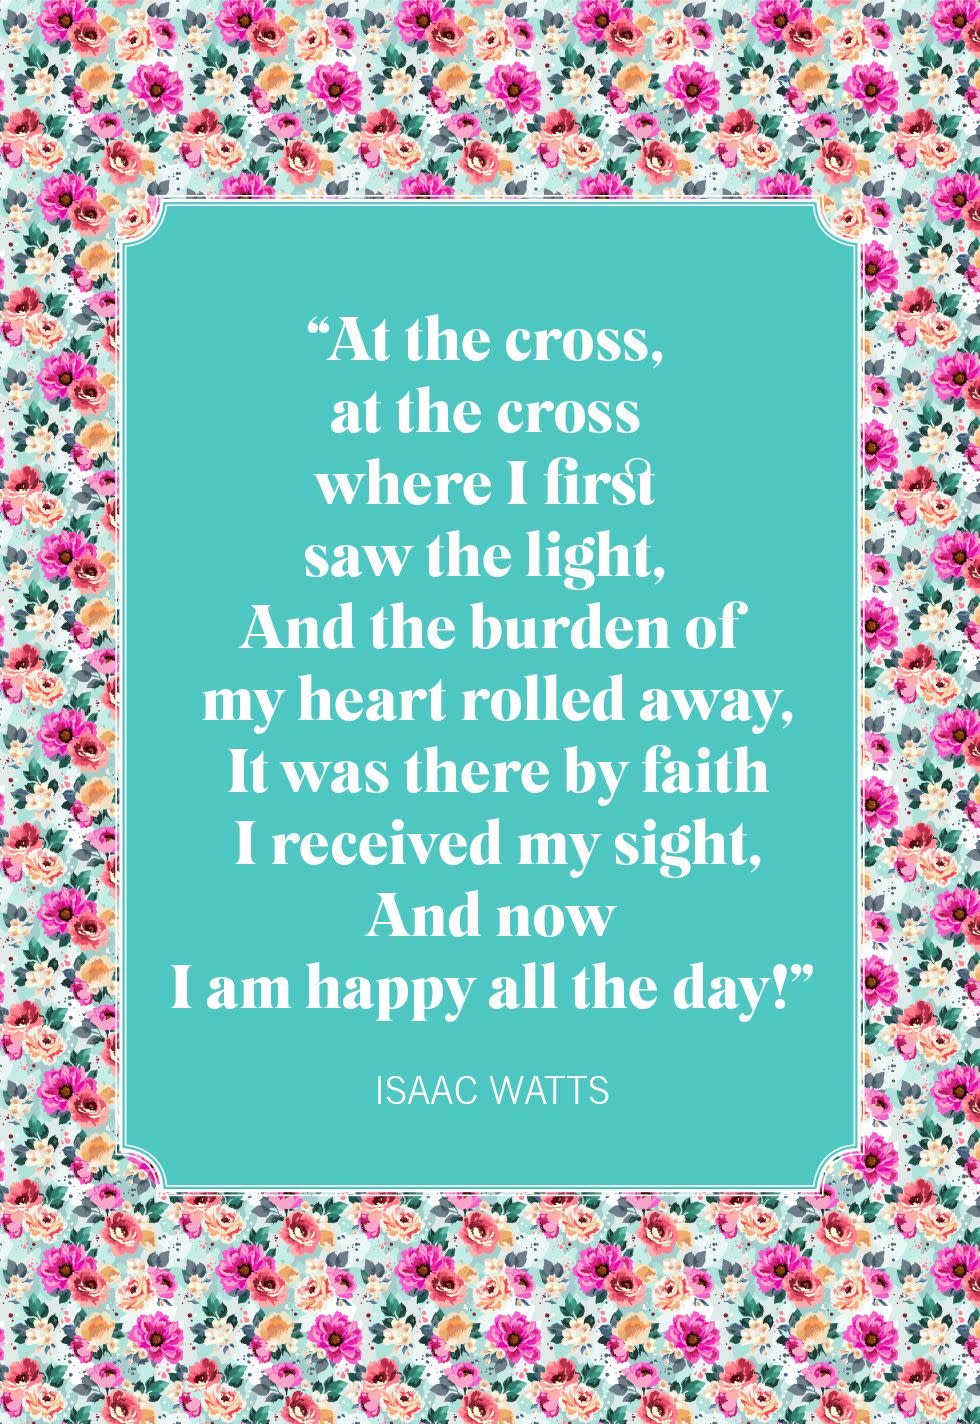 isaac watts easter quotes